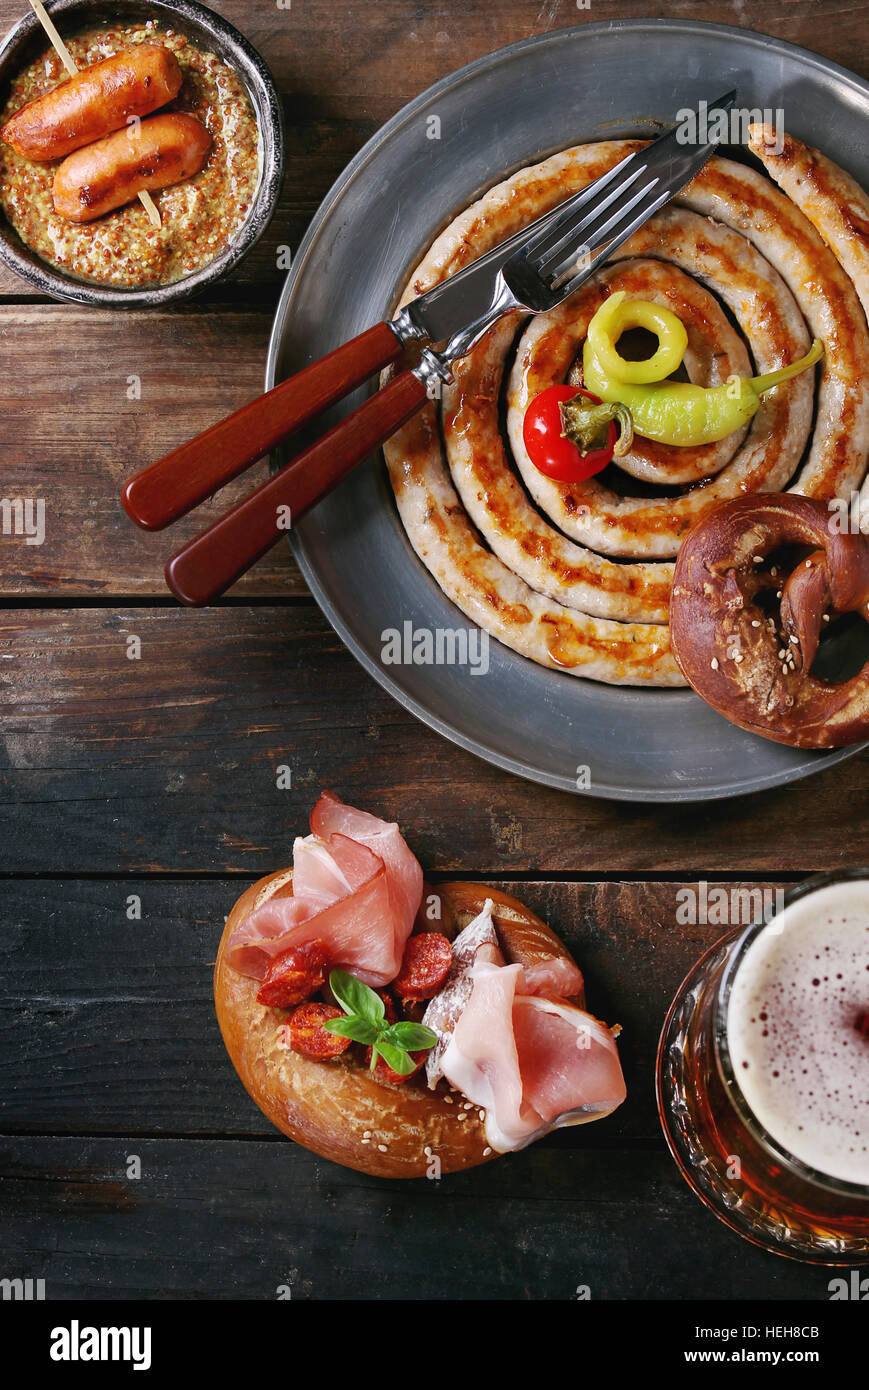 Big spiral fried sausage, meat snacks wienerwurst, ham, marinated chili peppers served in salted pretzels and plate with glass of lager beer and musta Stock Photo